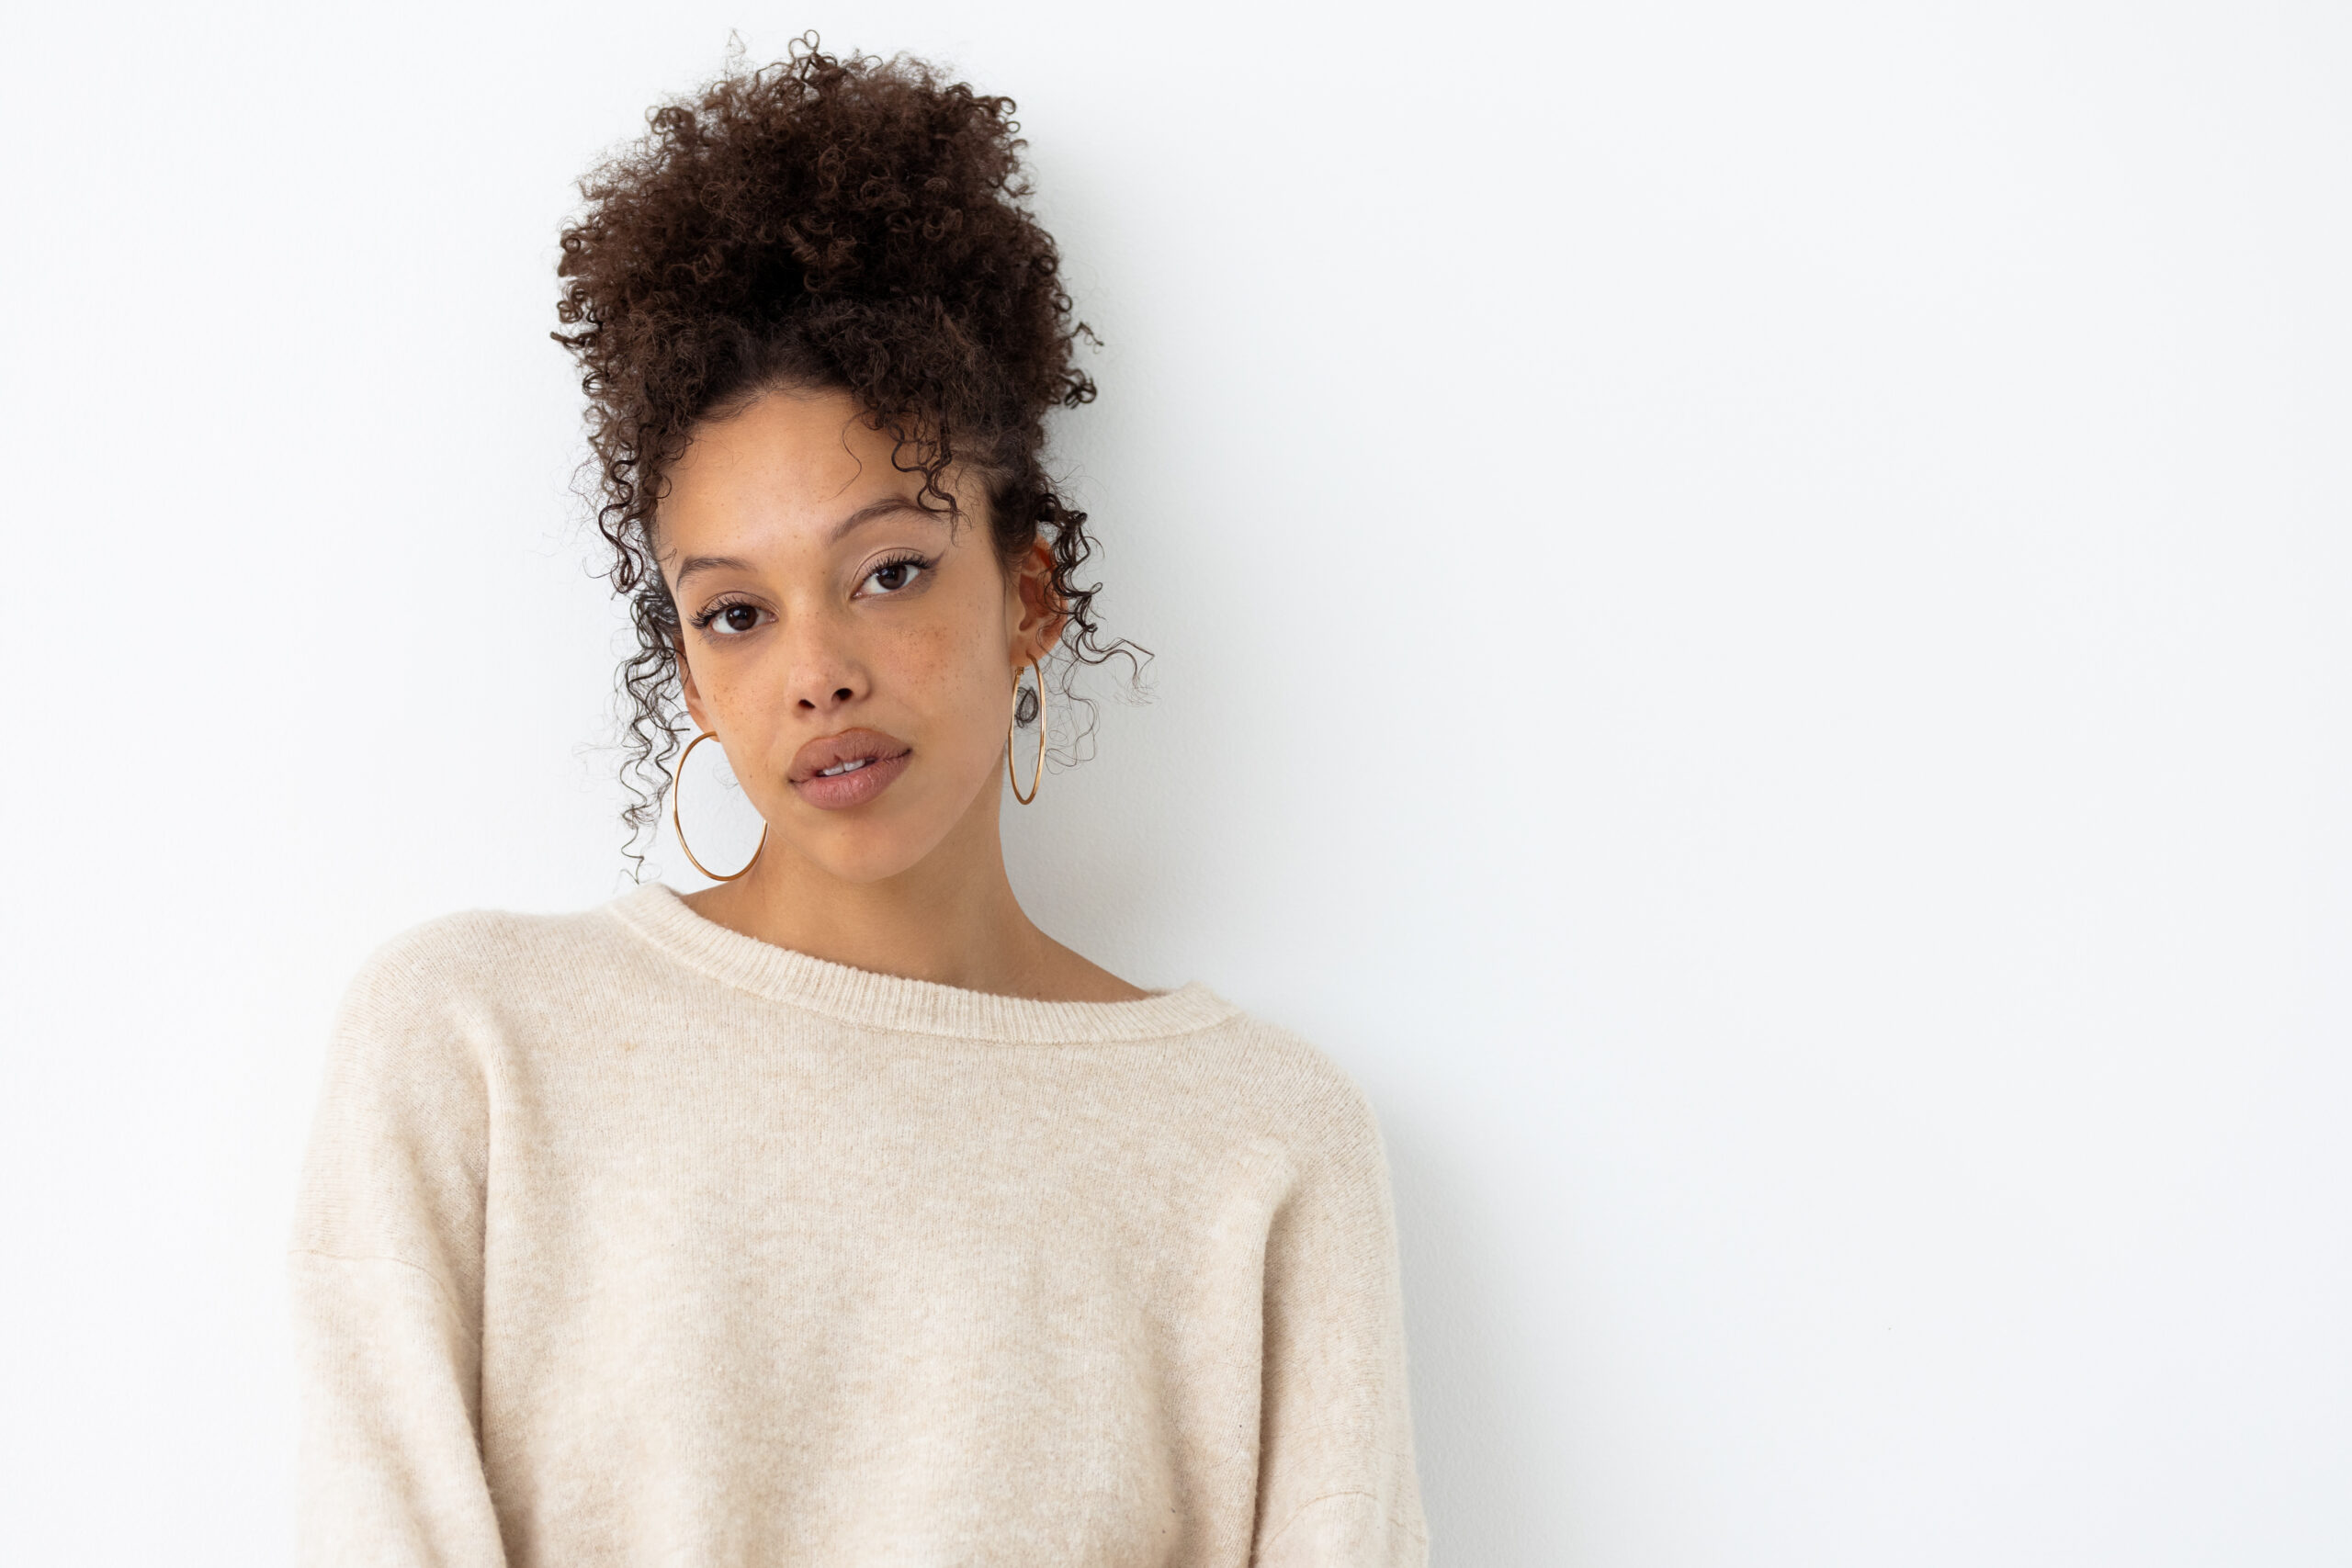 Woman with her natural curly hair in a loose bun on the top of her head, she is wearing a cream cashmere sweater and casually leaning back on a white wall.